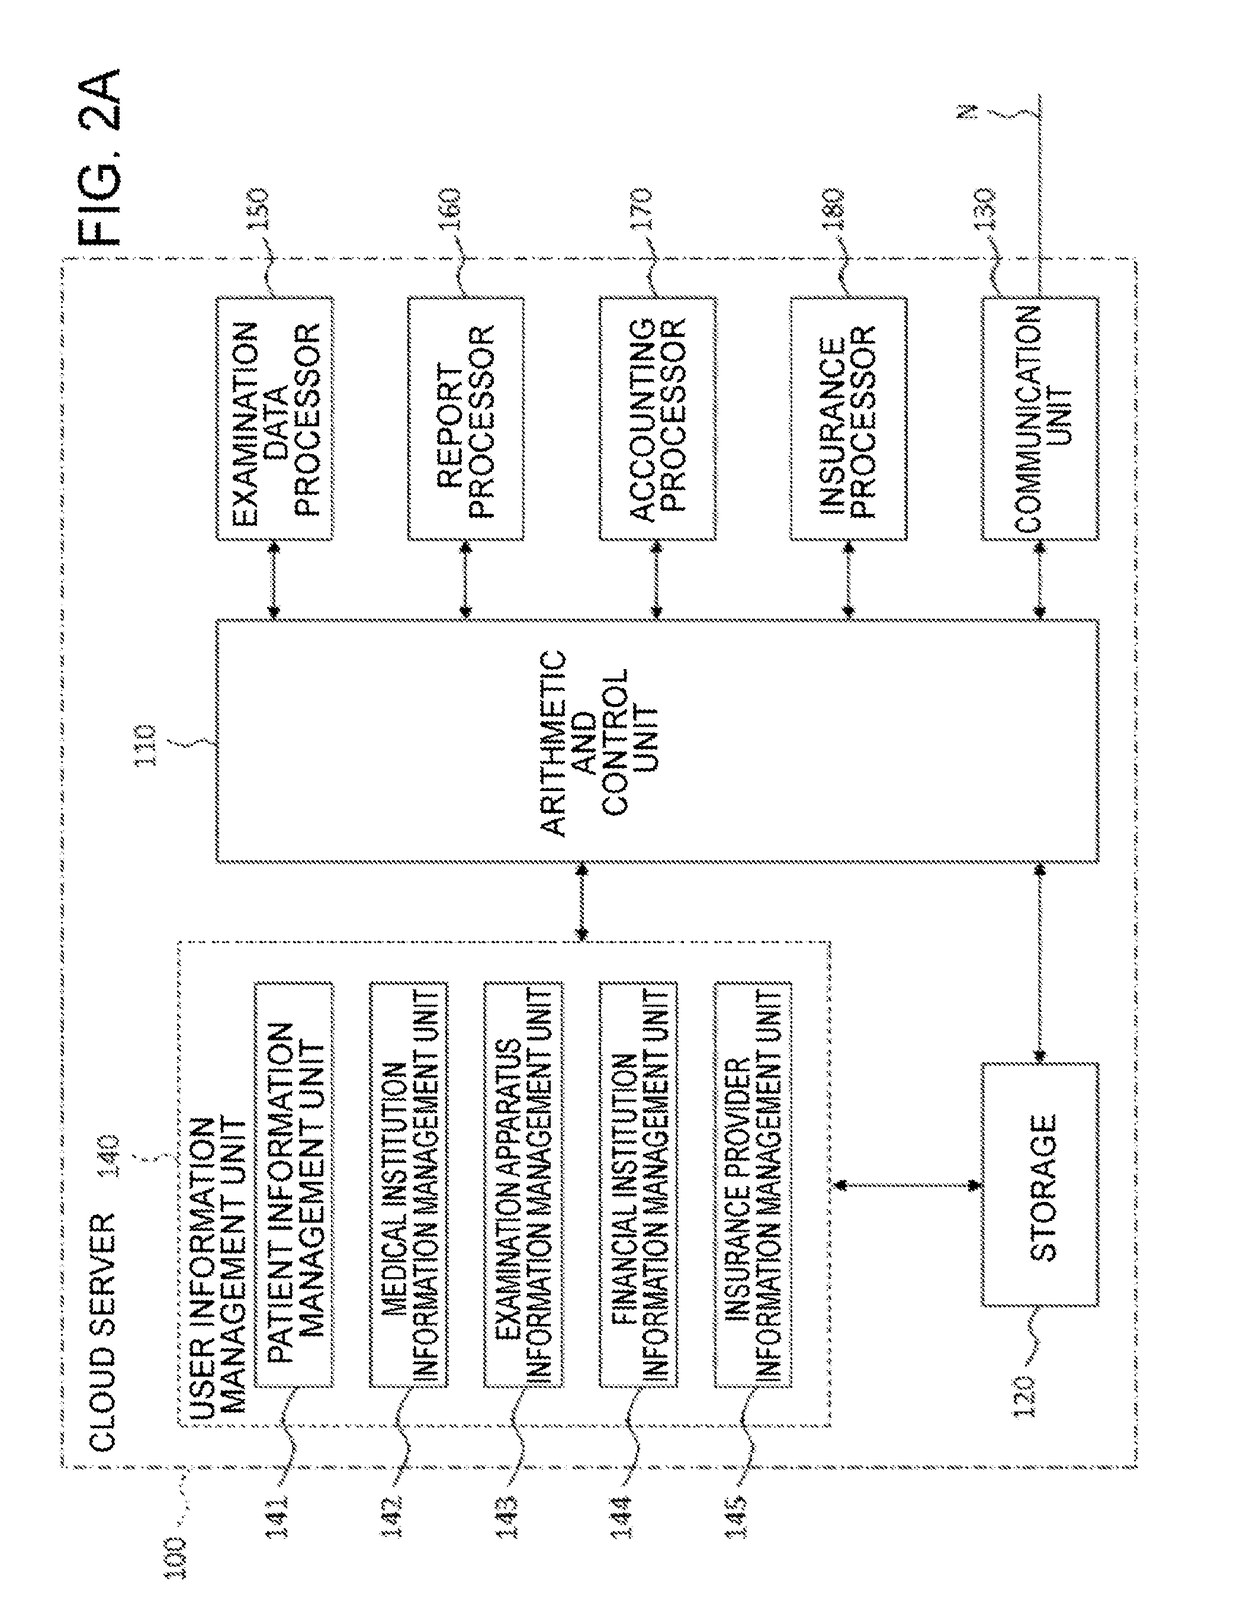 Ophthalmic information system and ophthalmic information processing server